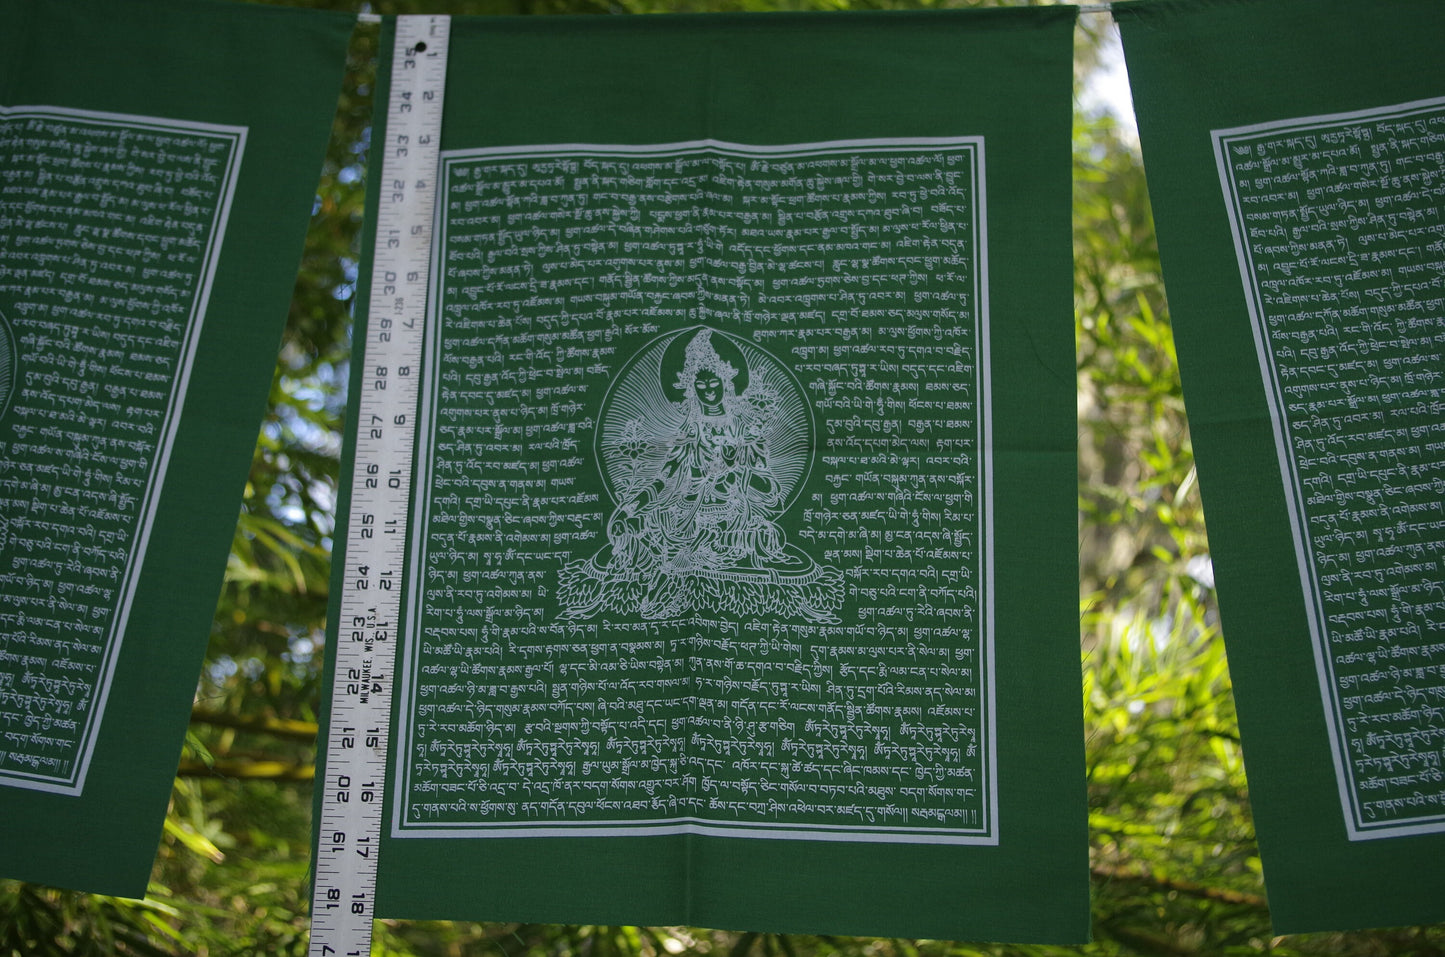 A single flag from a 5 flag strand of high-quality Green Tara Tibetan prayer flags, with white ink on green cloth, each measuring 14x17 inches and hanging outdoors.